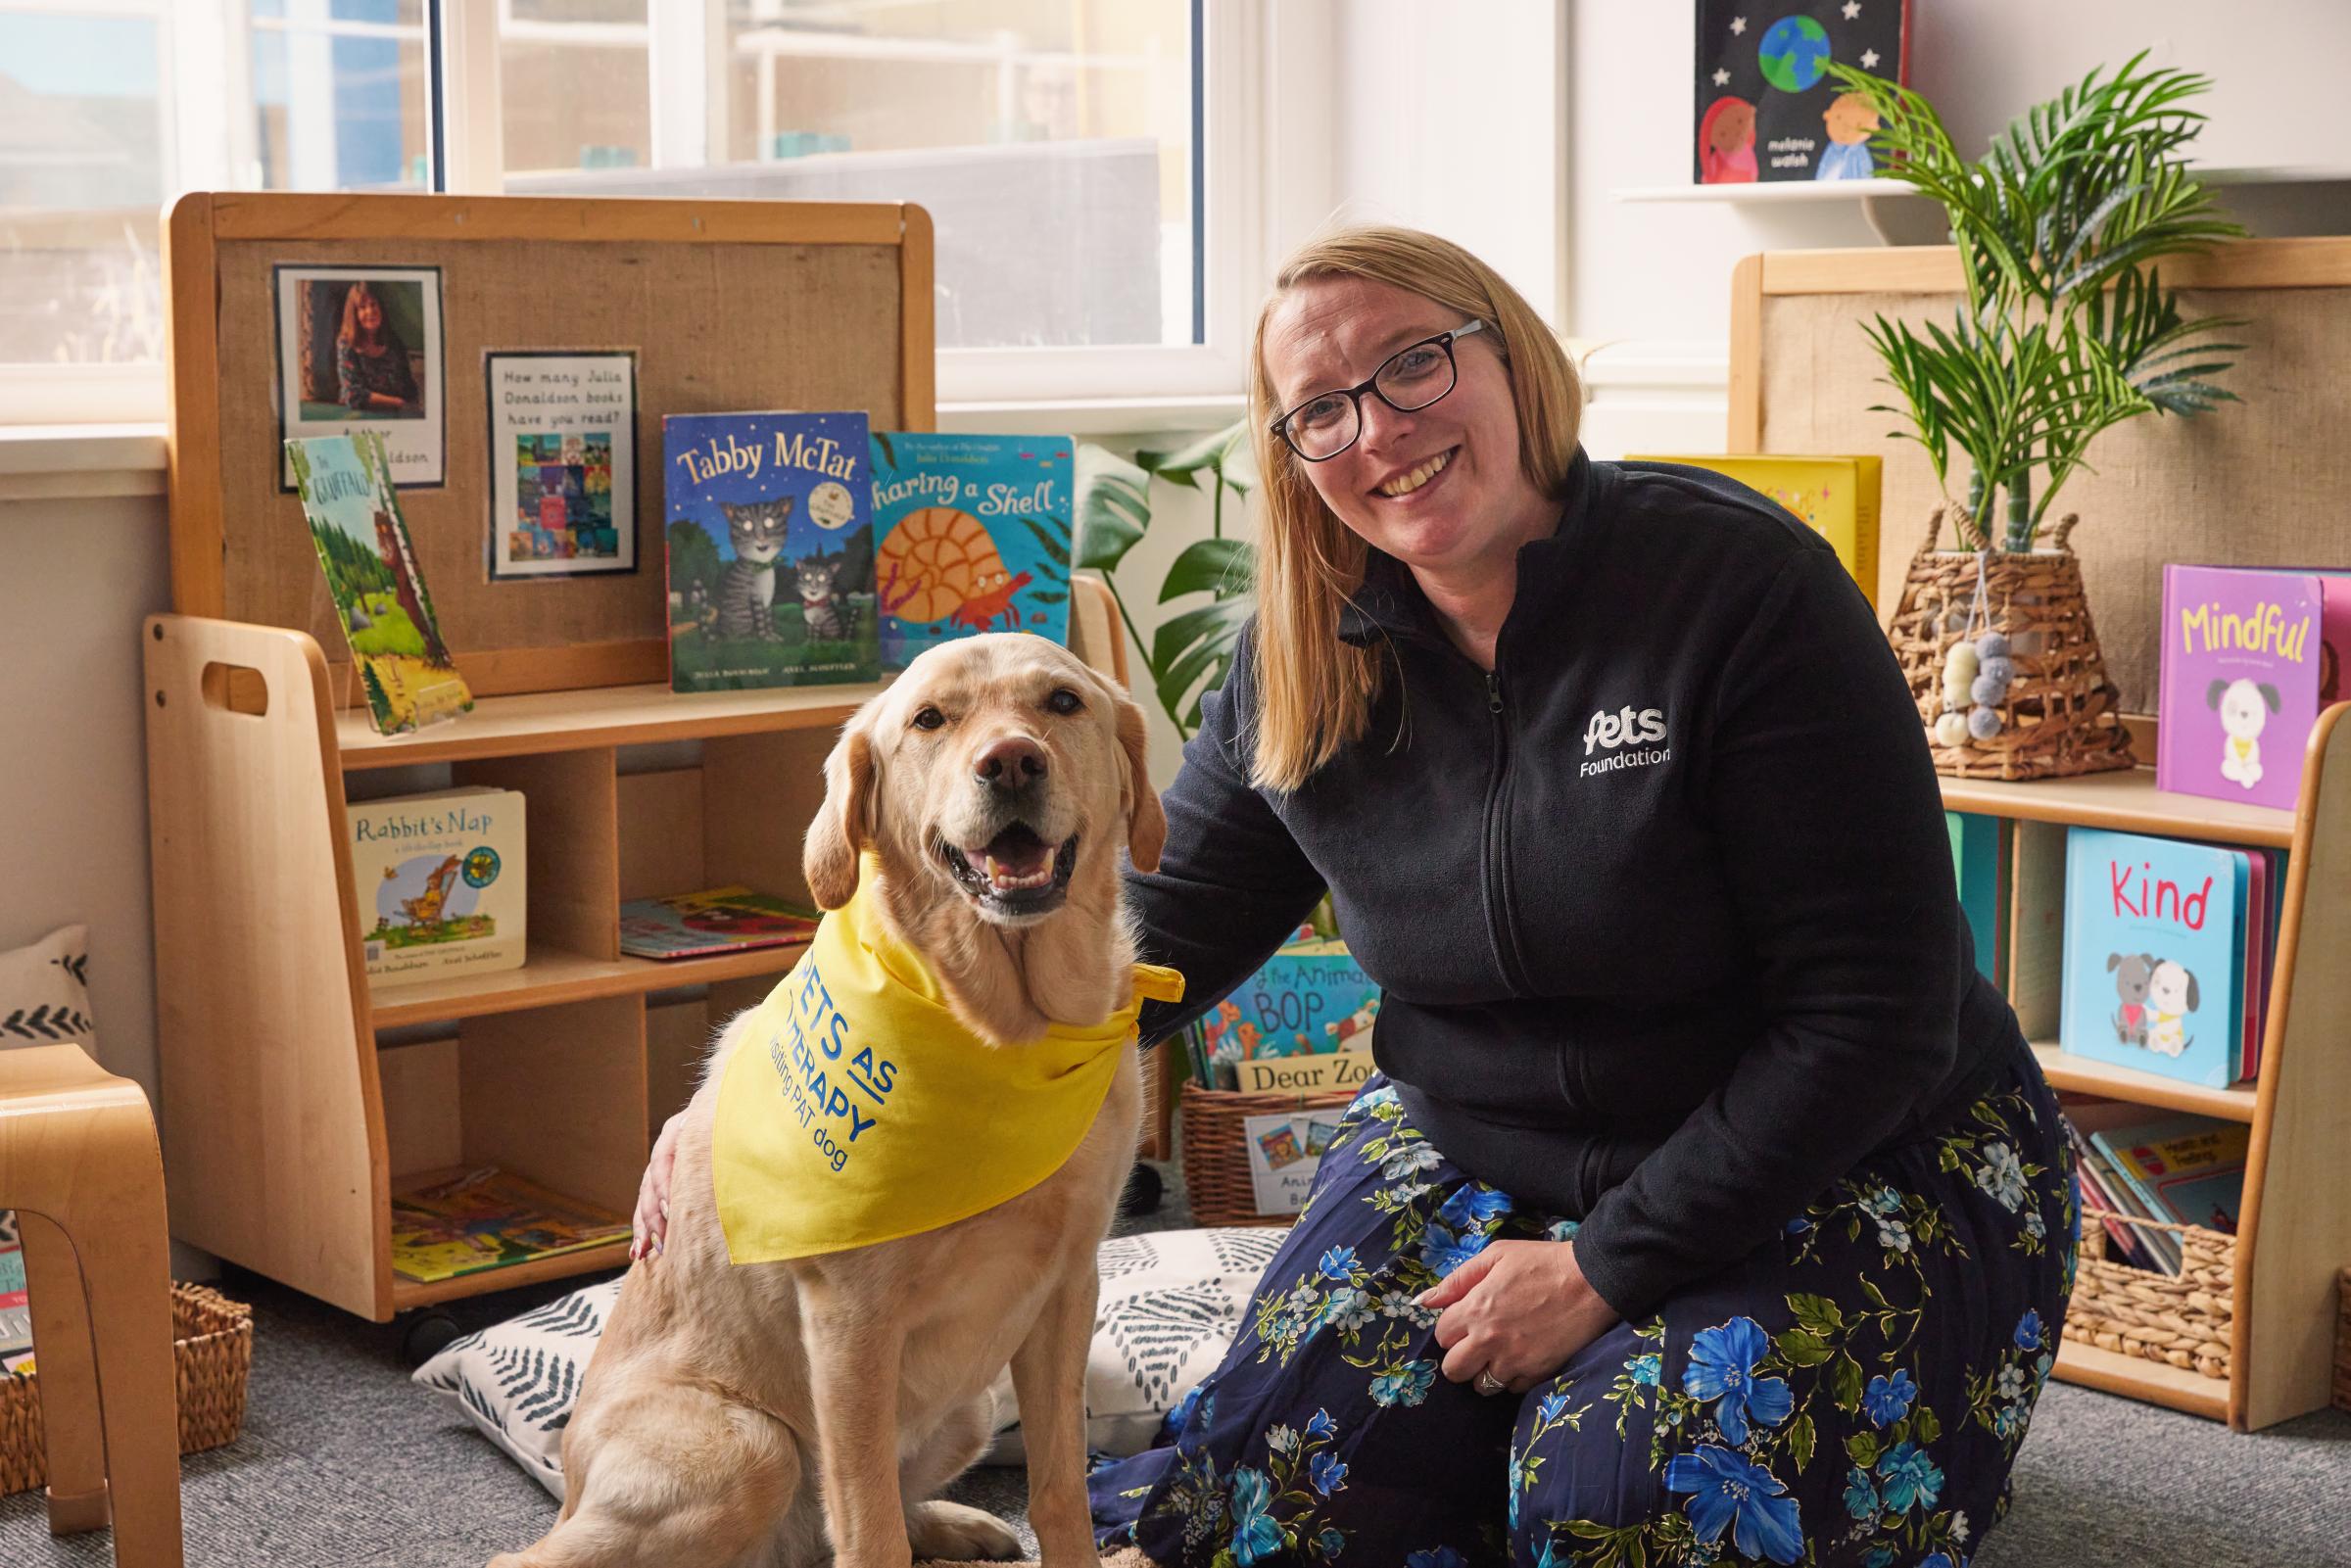 Each week, pupils of Frodsham Primary Academy are invited to read aloud to therapy dog Opal and owner Suzie Dickens.